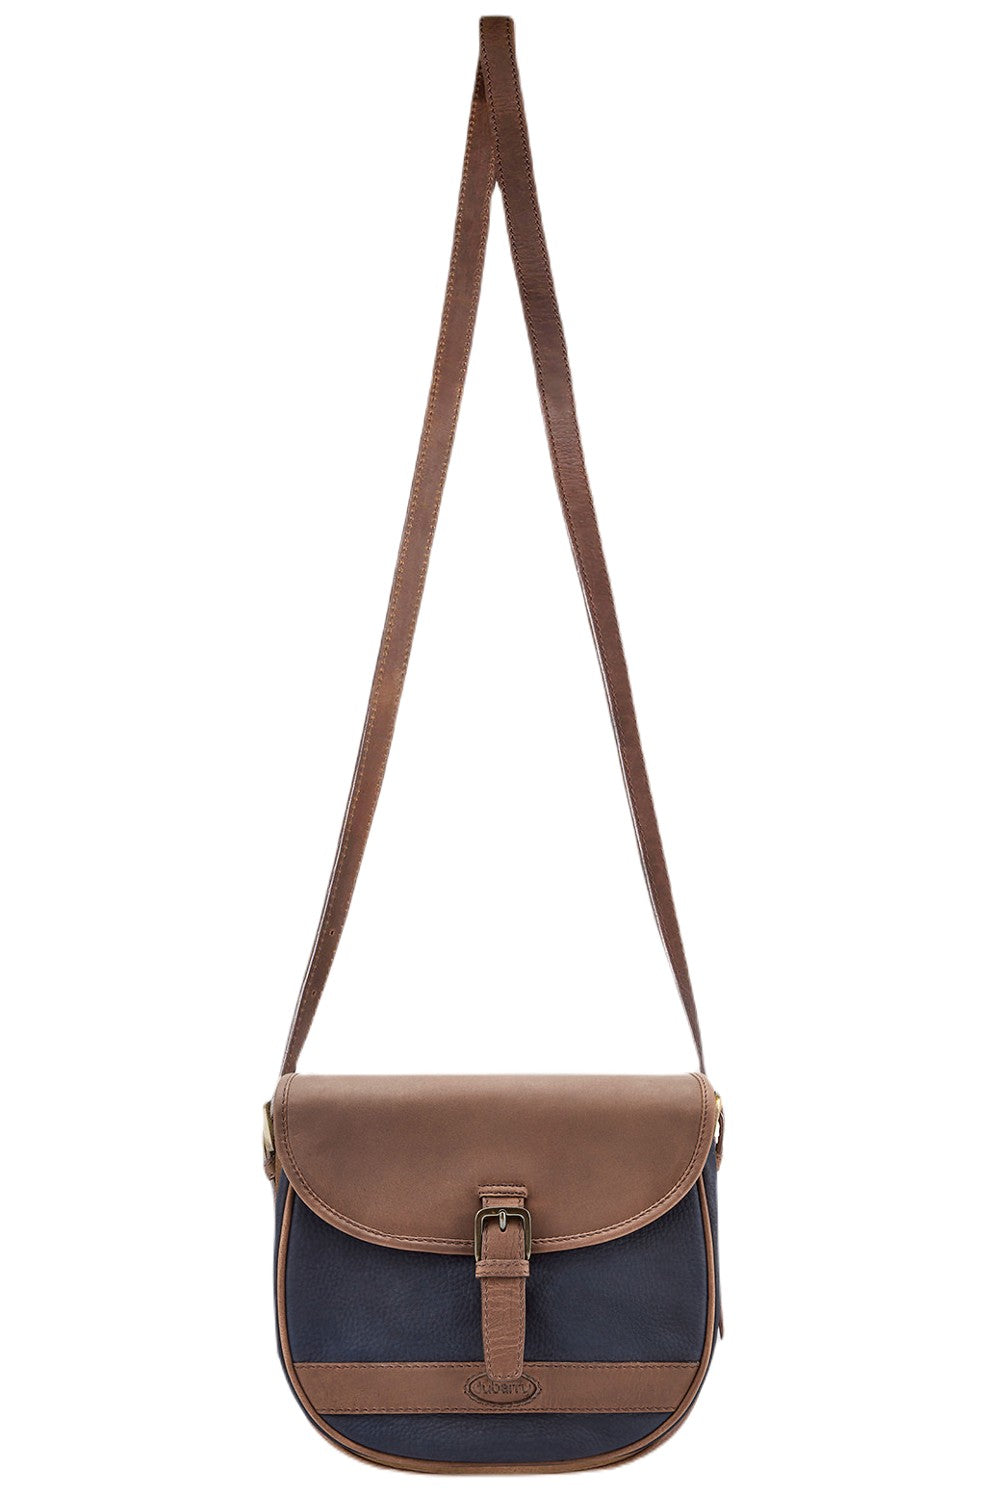 Dubarry Clara Leather Saddle Bag in Navy/Brown